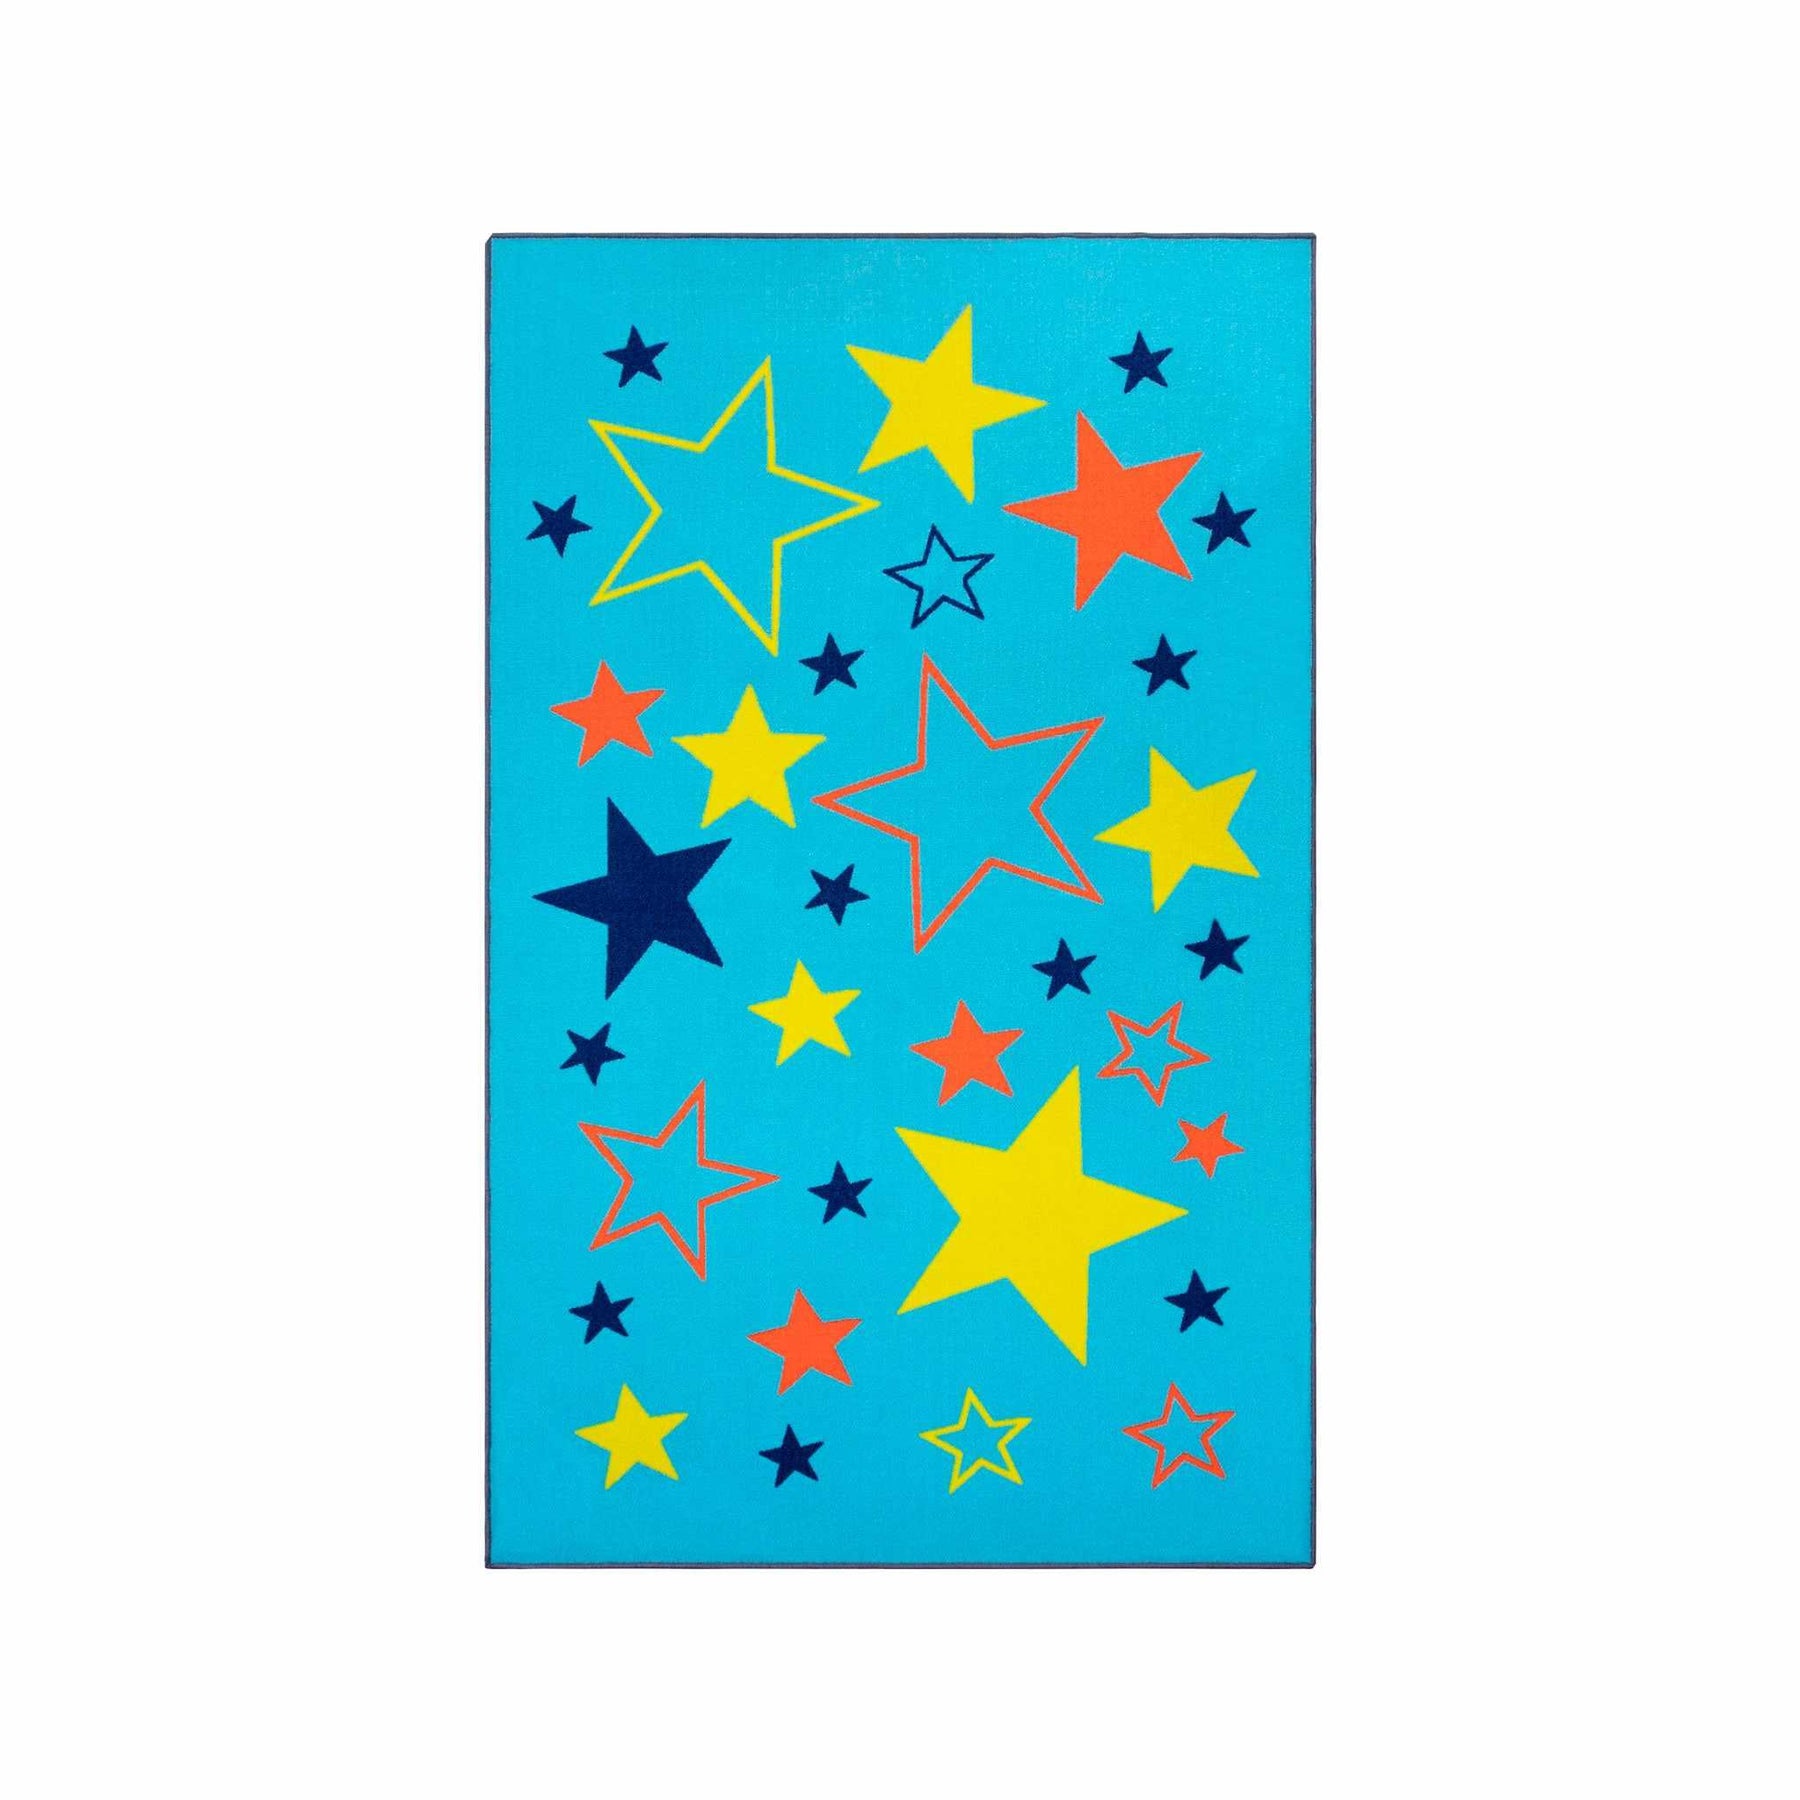  All-Star Non-Slip Kids Indoor Washable Area Rug.